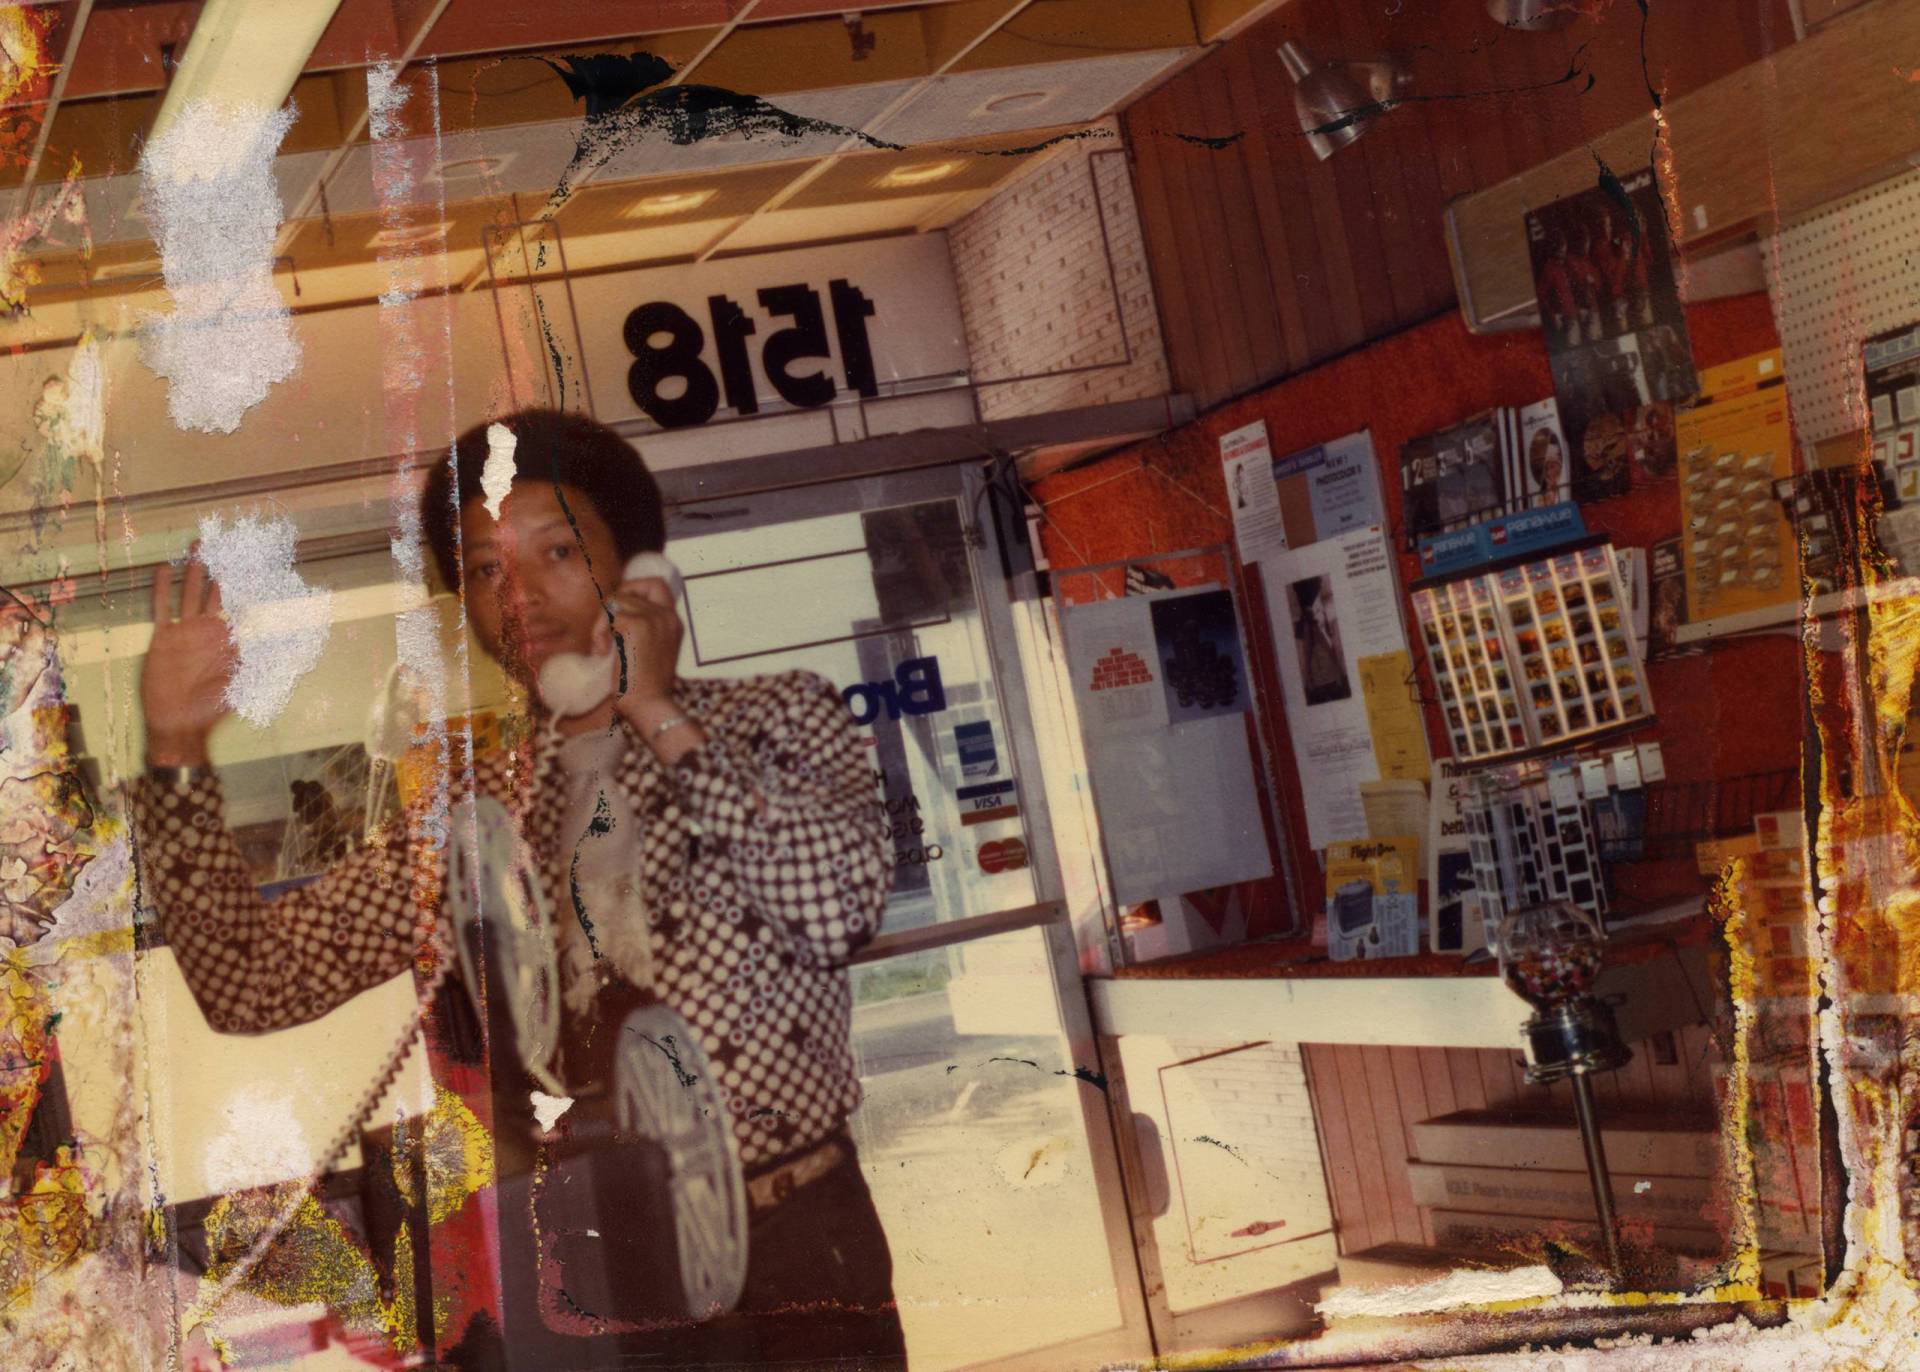 A slightly damaged photograph of a Black man on the phone inside a small business. He is waving to the photographer.